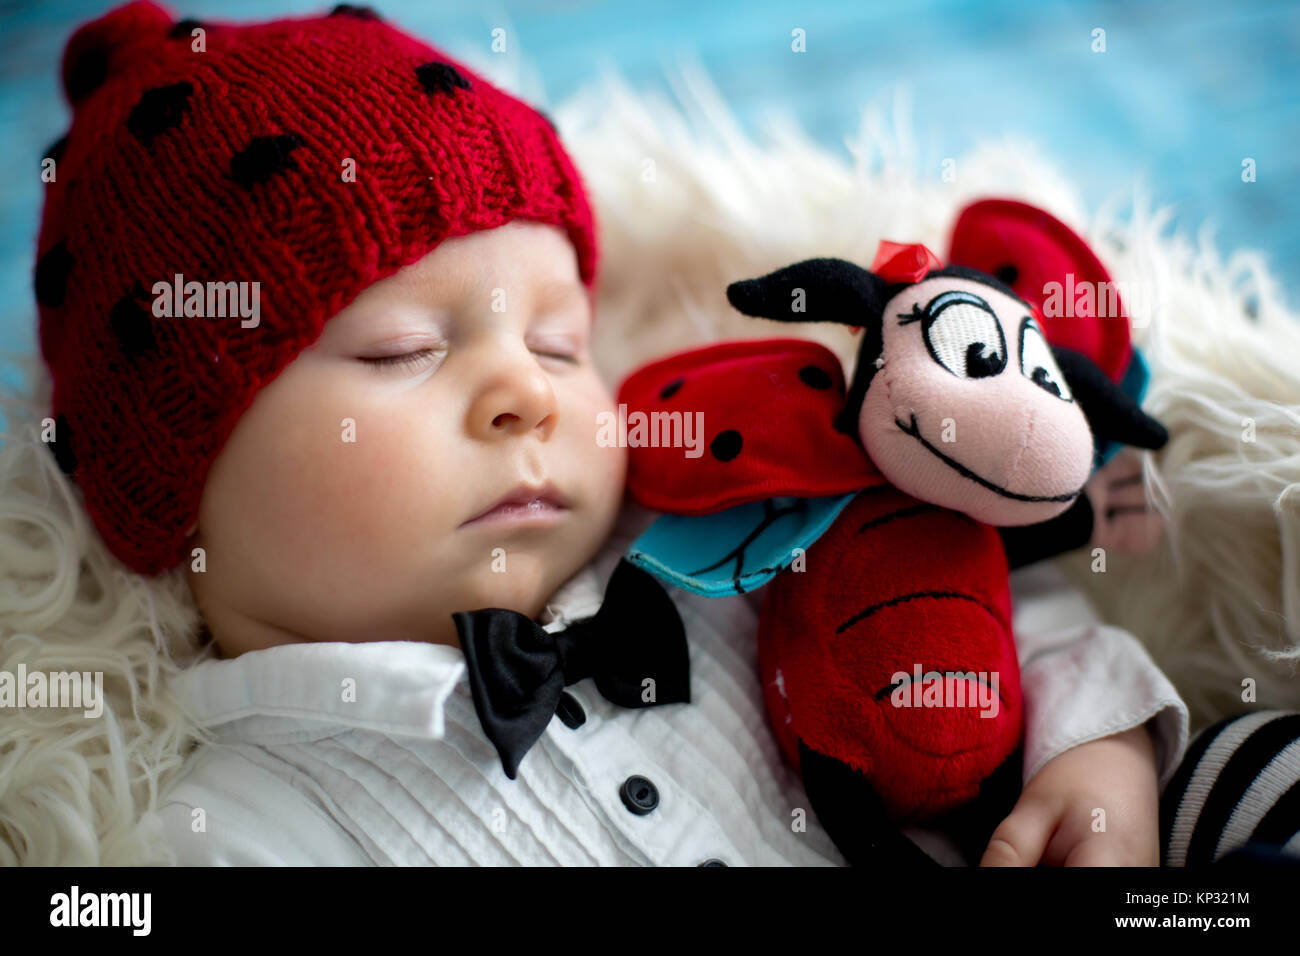 Little baby boy with knitted ladybug hat and pants in a basket, sleeping peacefully in a basket, isolated studio shot Stock Photo